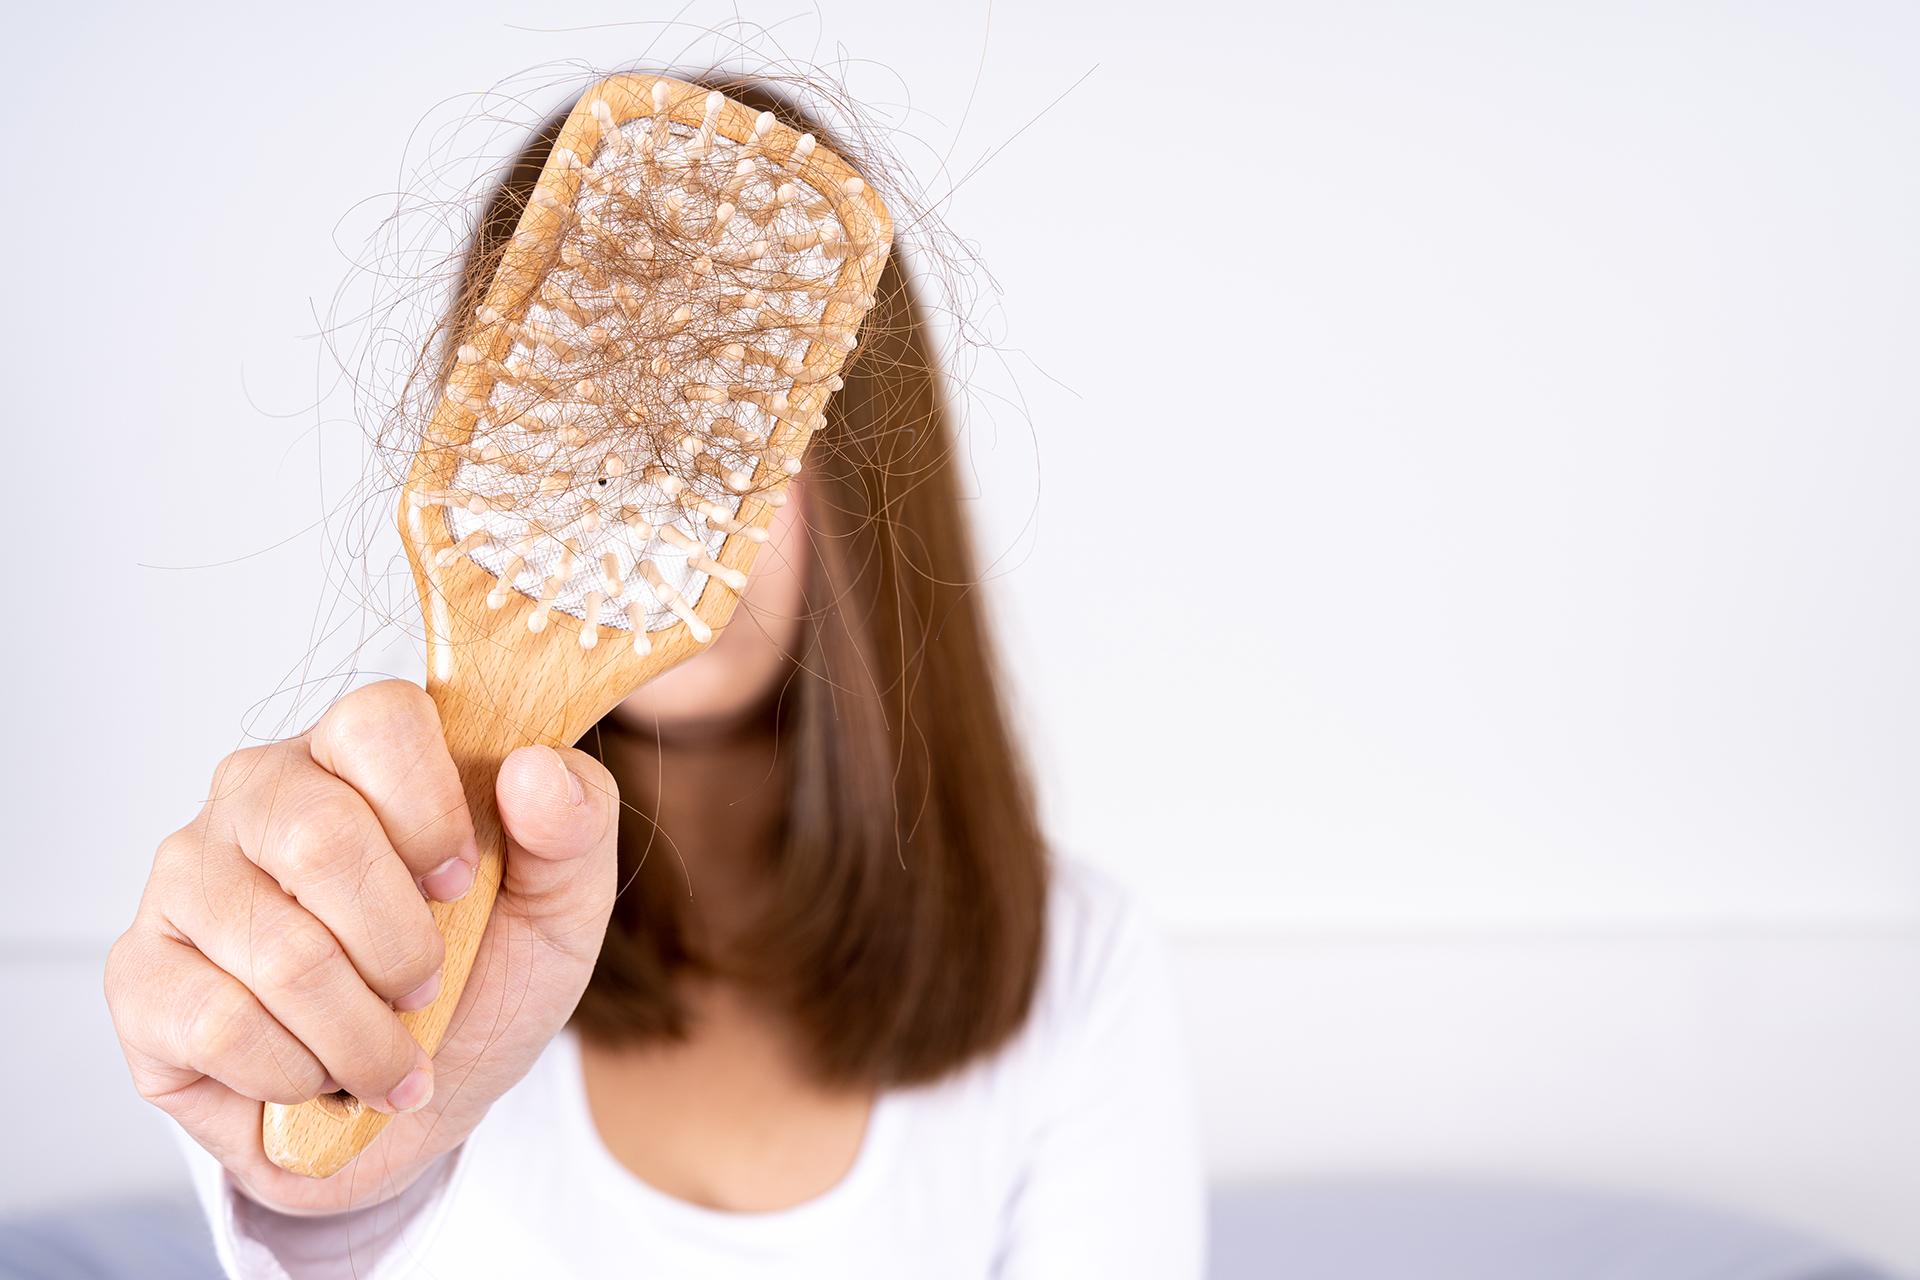 PCOS Hair Loss: Causes, Treatment and Home Remedies